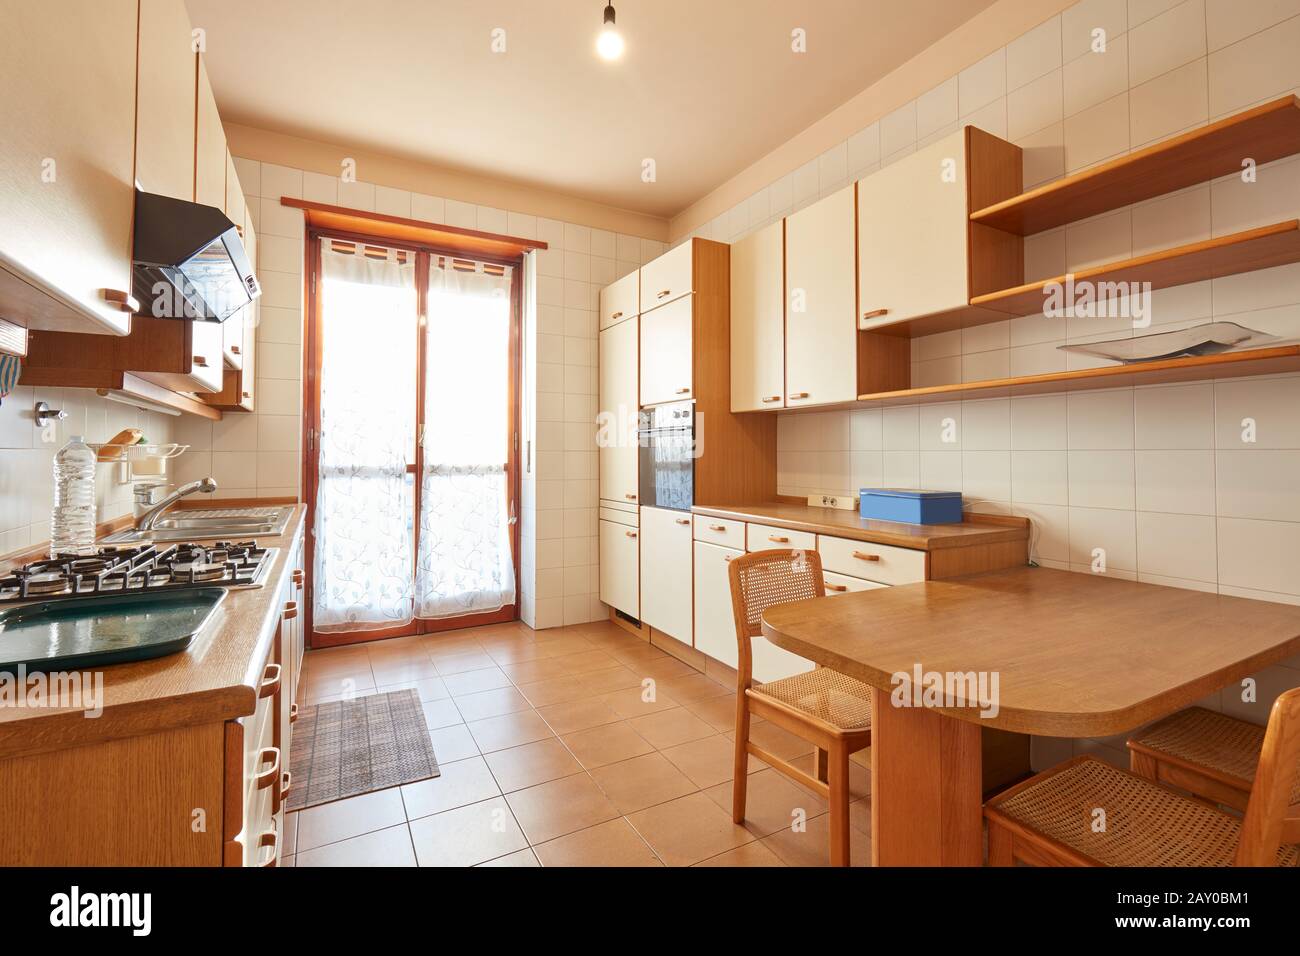 Kitchen interior with wooden table in a sunny day in normal apartment Stock Photo